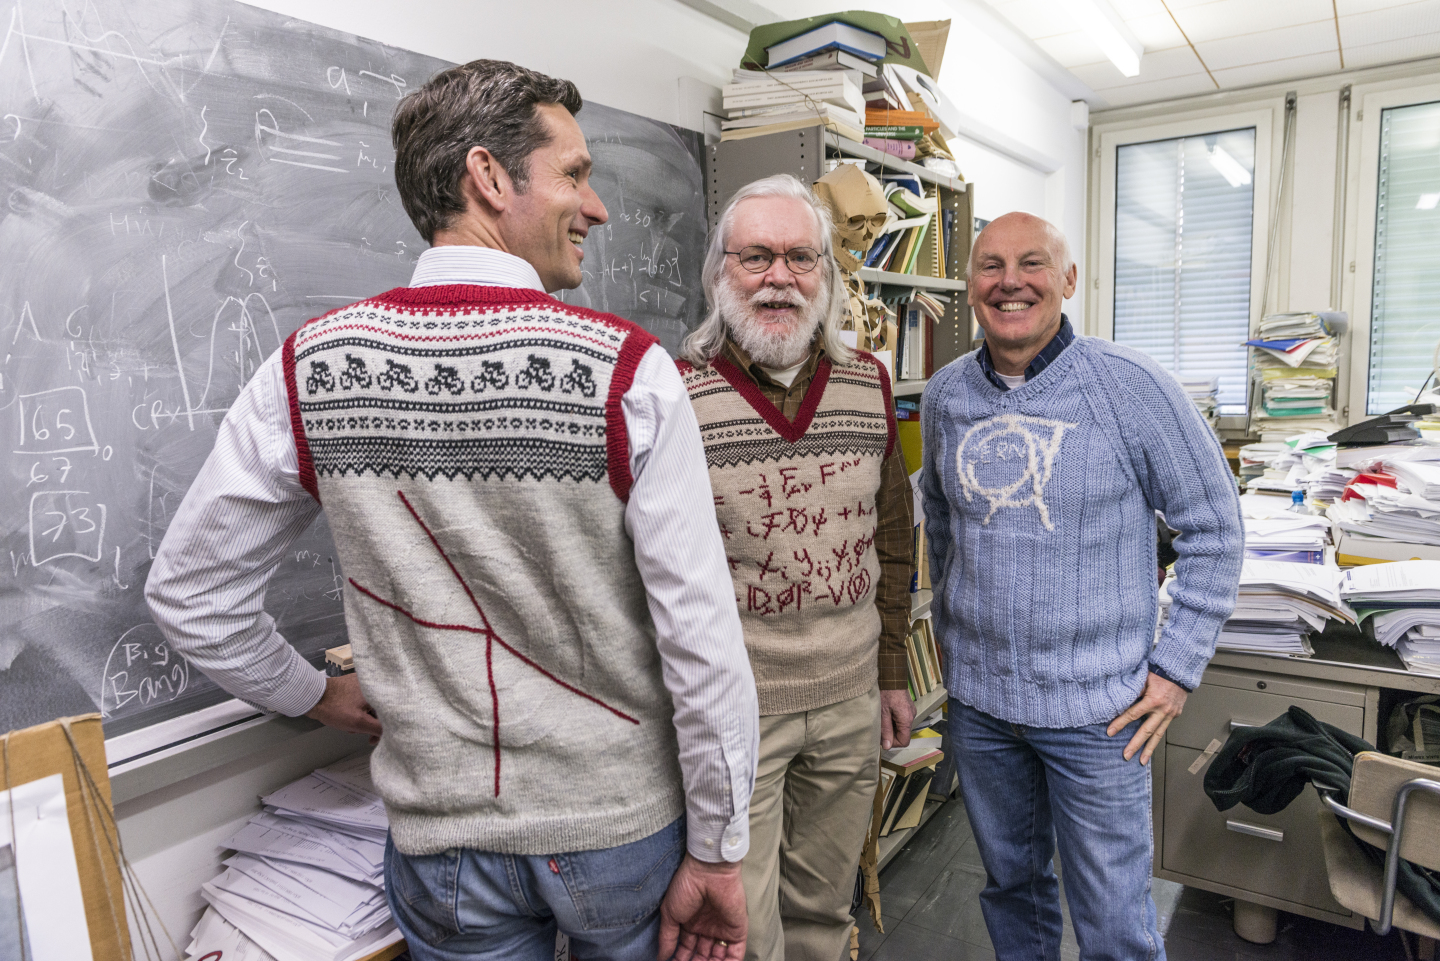 Particle physicists in Norwegian knitwear. Oh yes. 